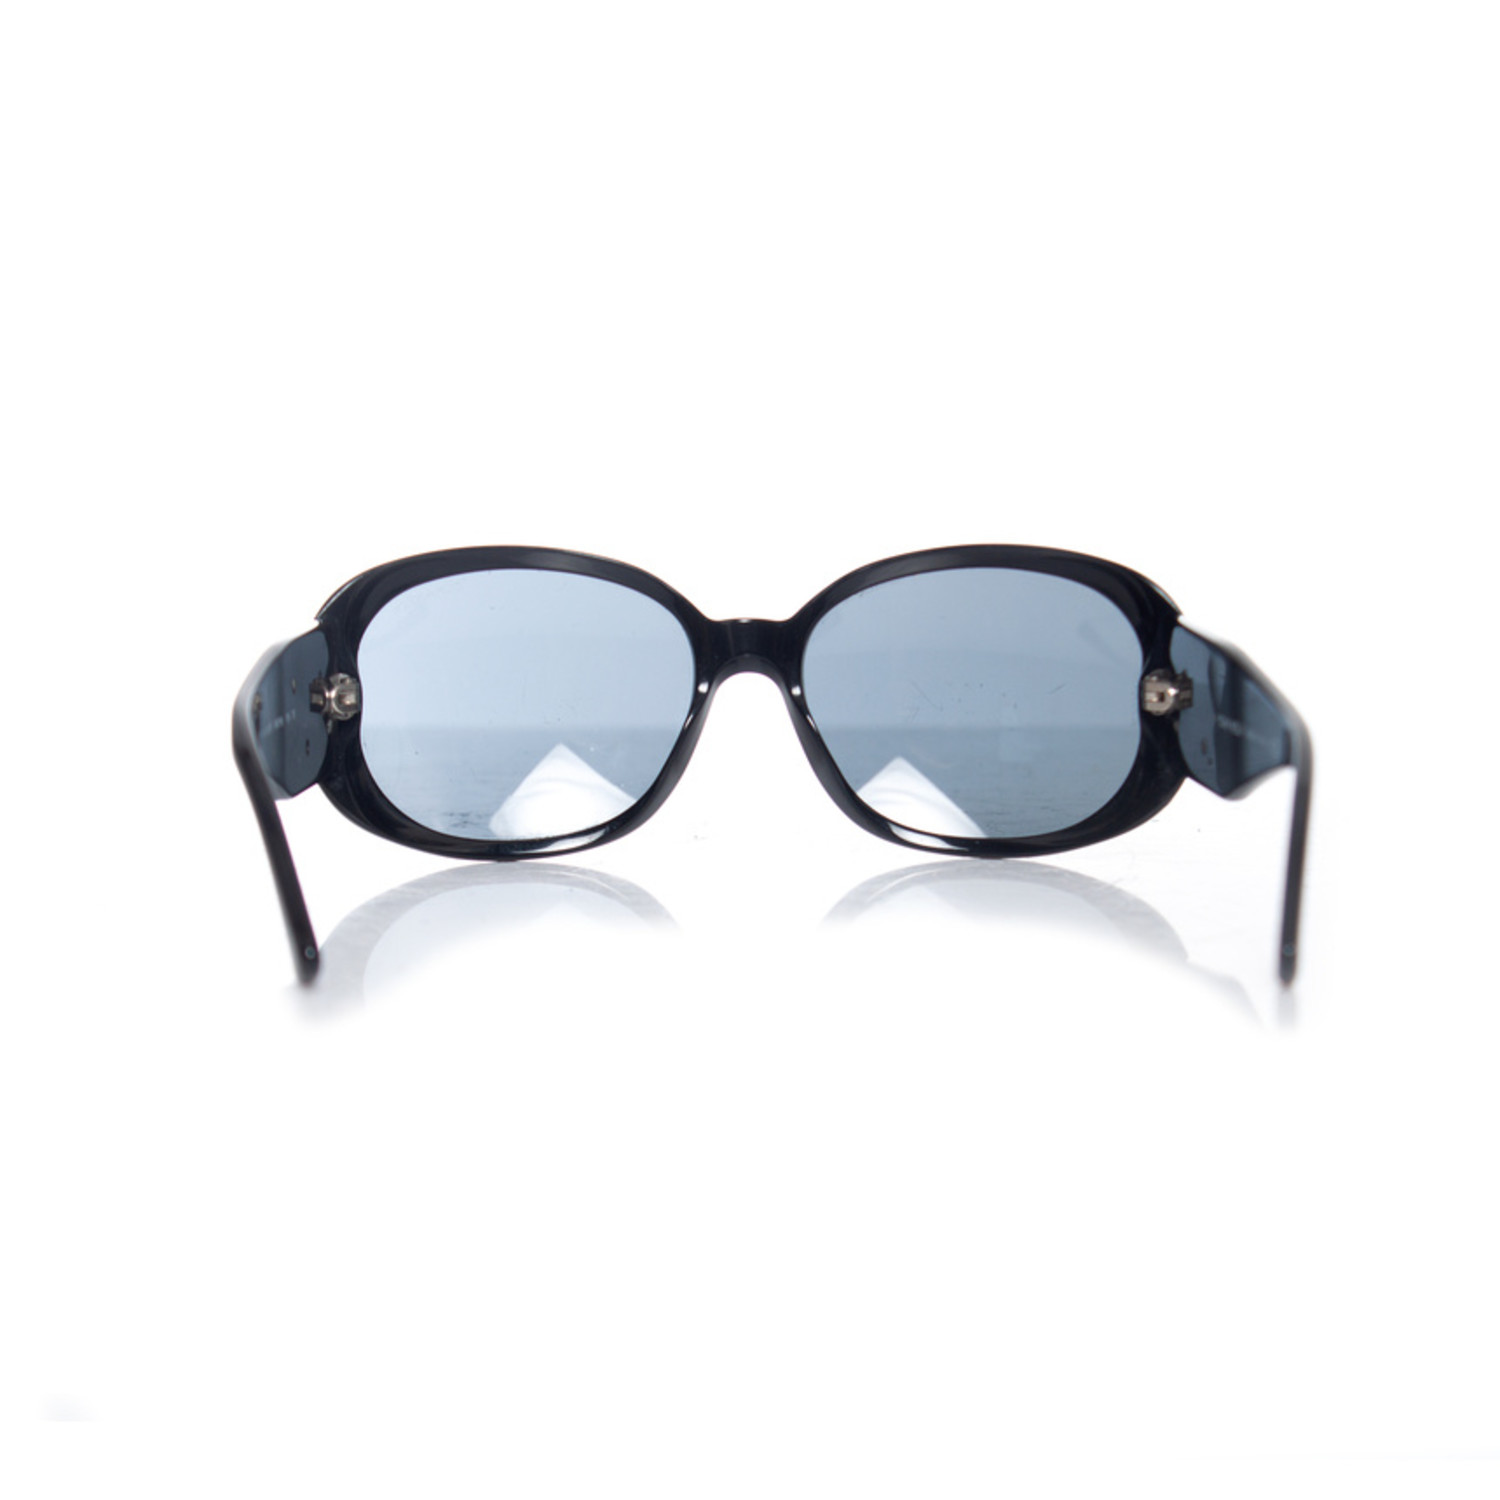 CHANEL sunglasses - Limited Edition - CH5318Q C501S8 - Black - Camellia  Flowers